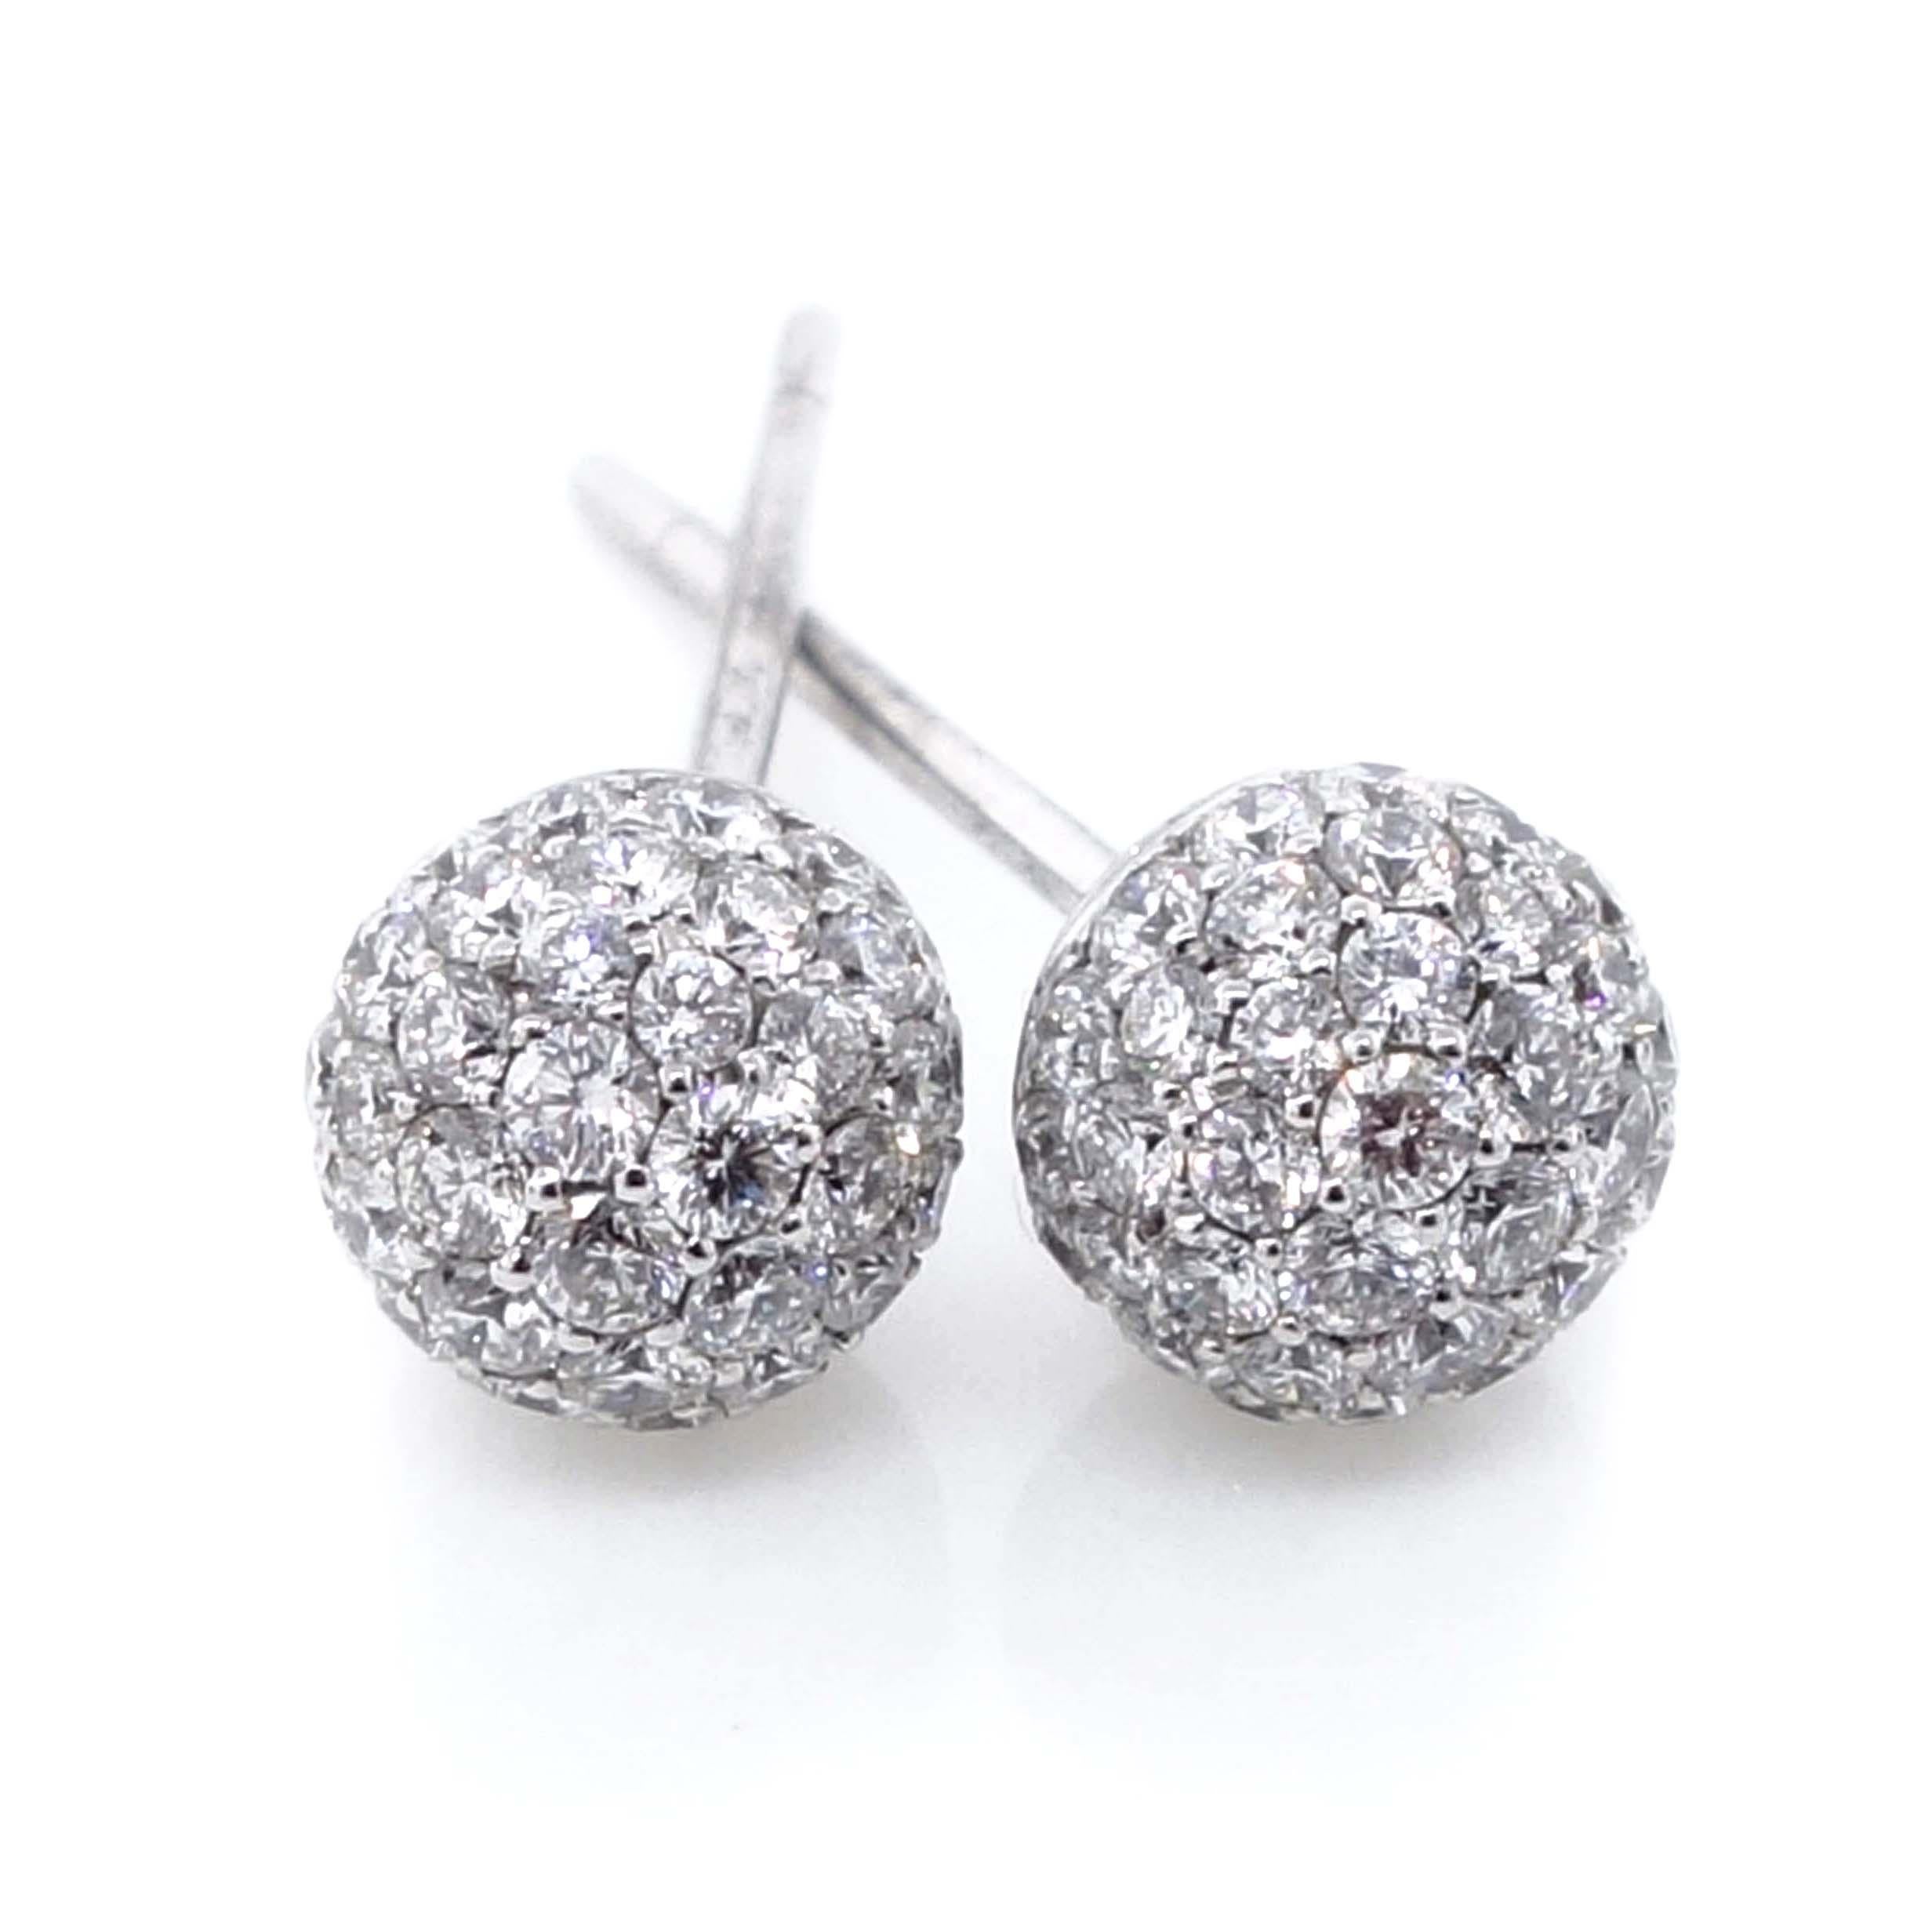 Diamond Earrings containing 110 round brilliant cut diamonds of about 0.70 carats with a clarity of VS and color G. All diamonds are set in 18k white gold. Total weight of the earrings is approximately 2.63 grams.
Measurements: W 0.25 x H 0.25 inch
